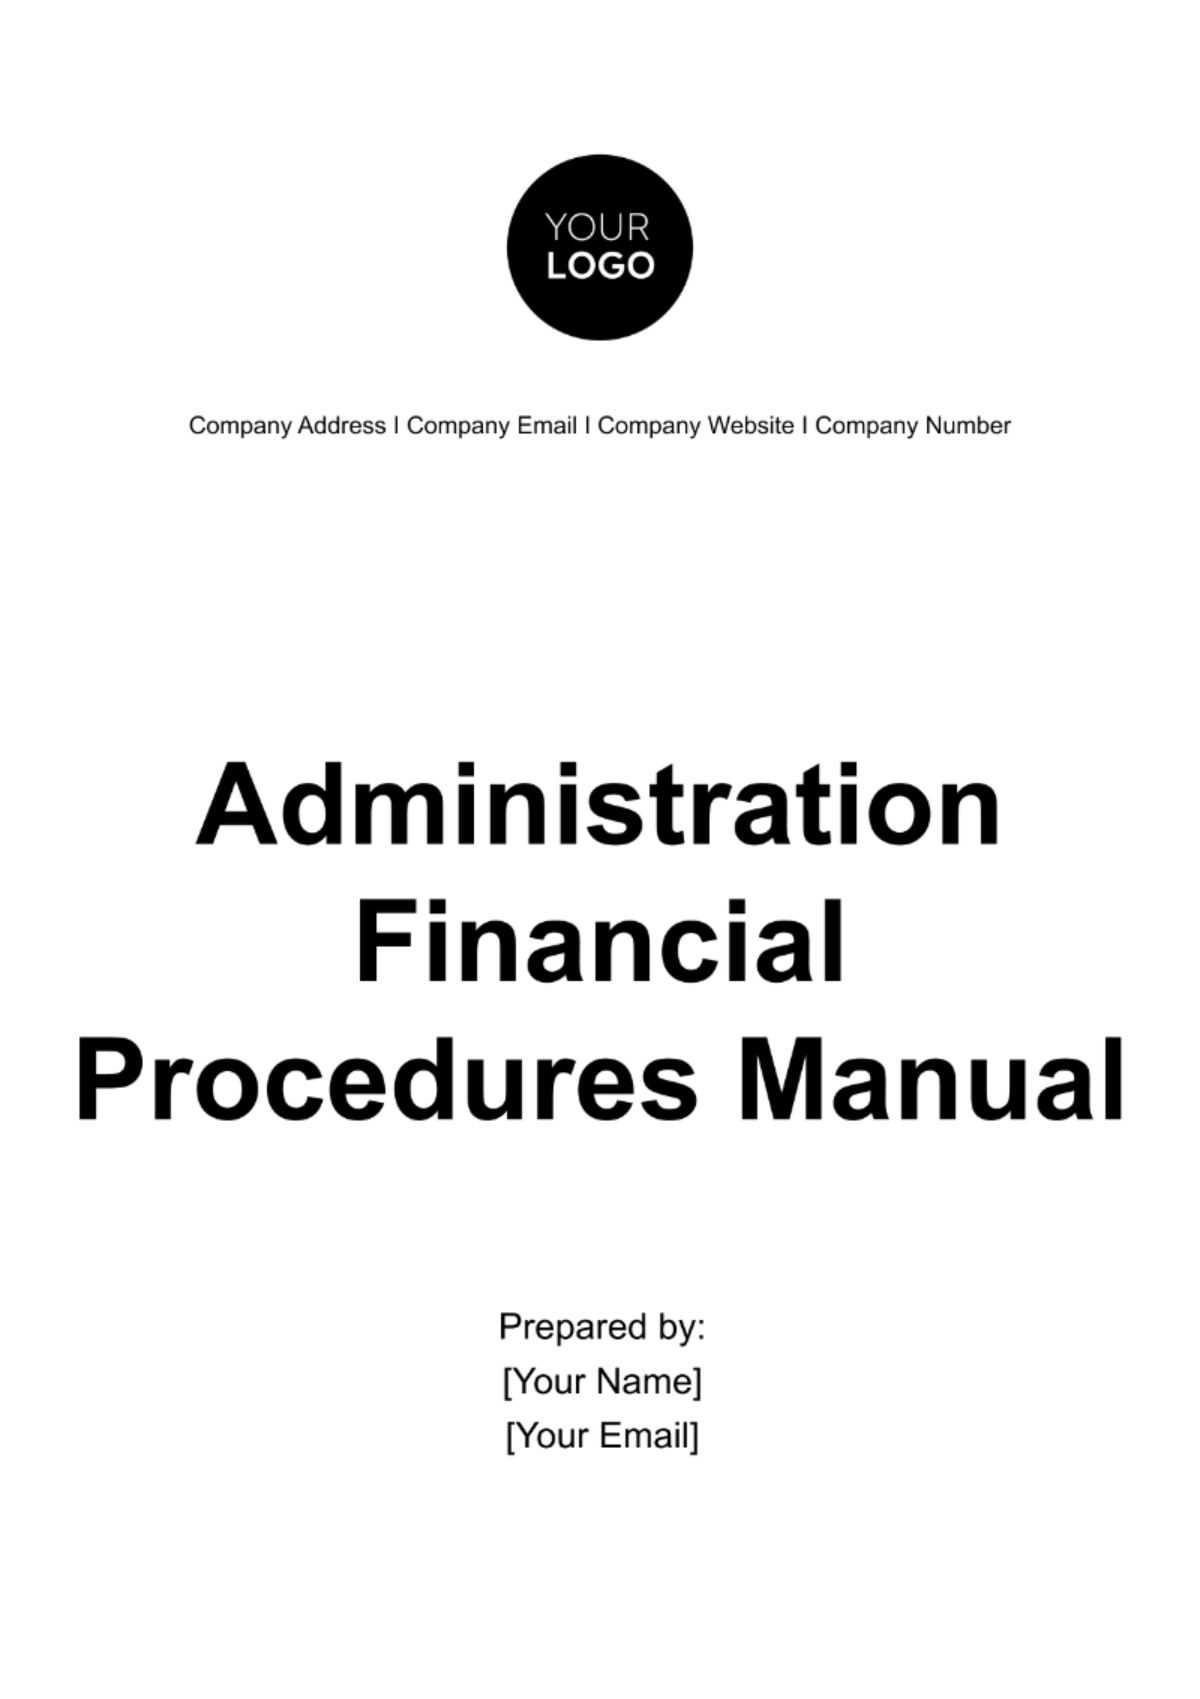 Administration Financial Procedures Manual Template